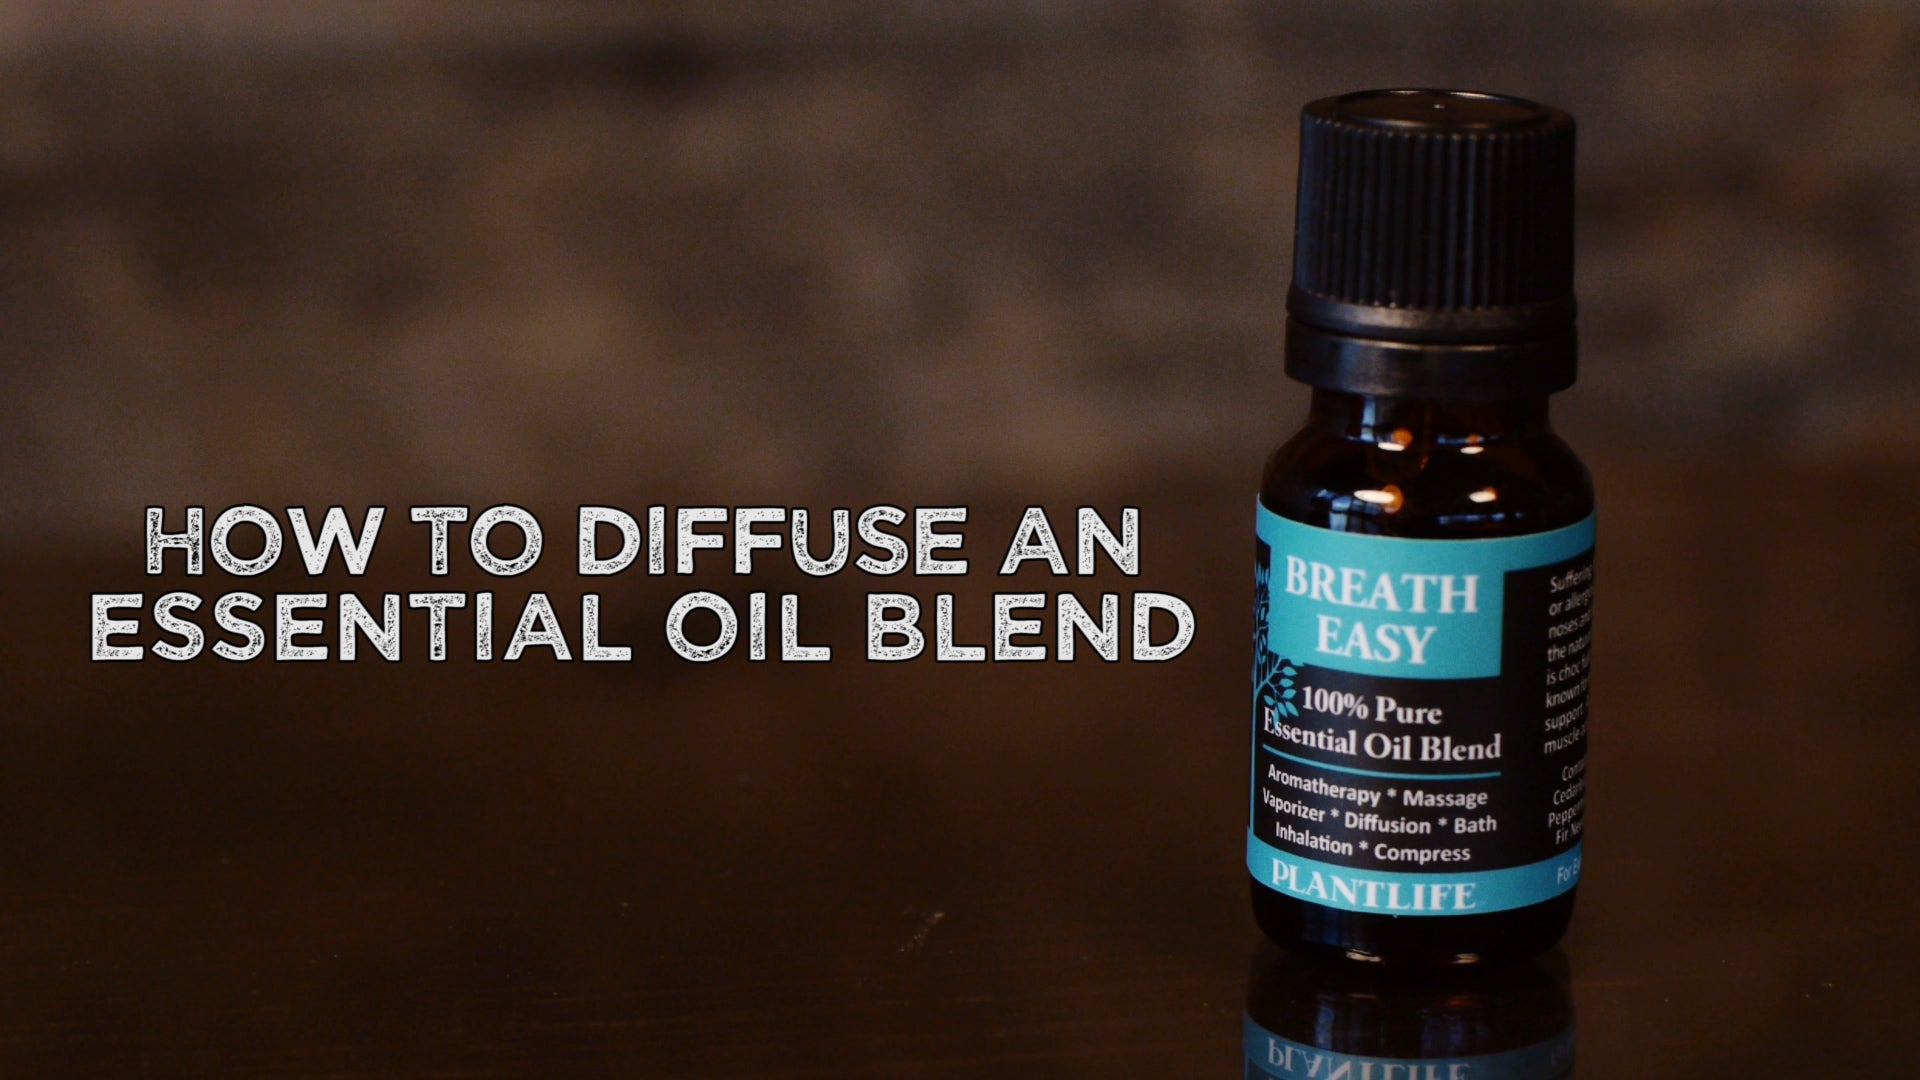 How To Diffuse An Essential Oil Blend